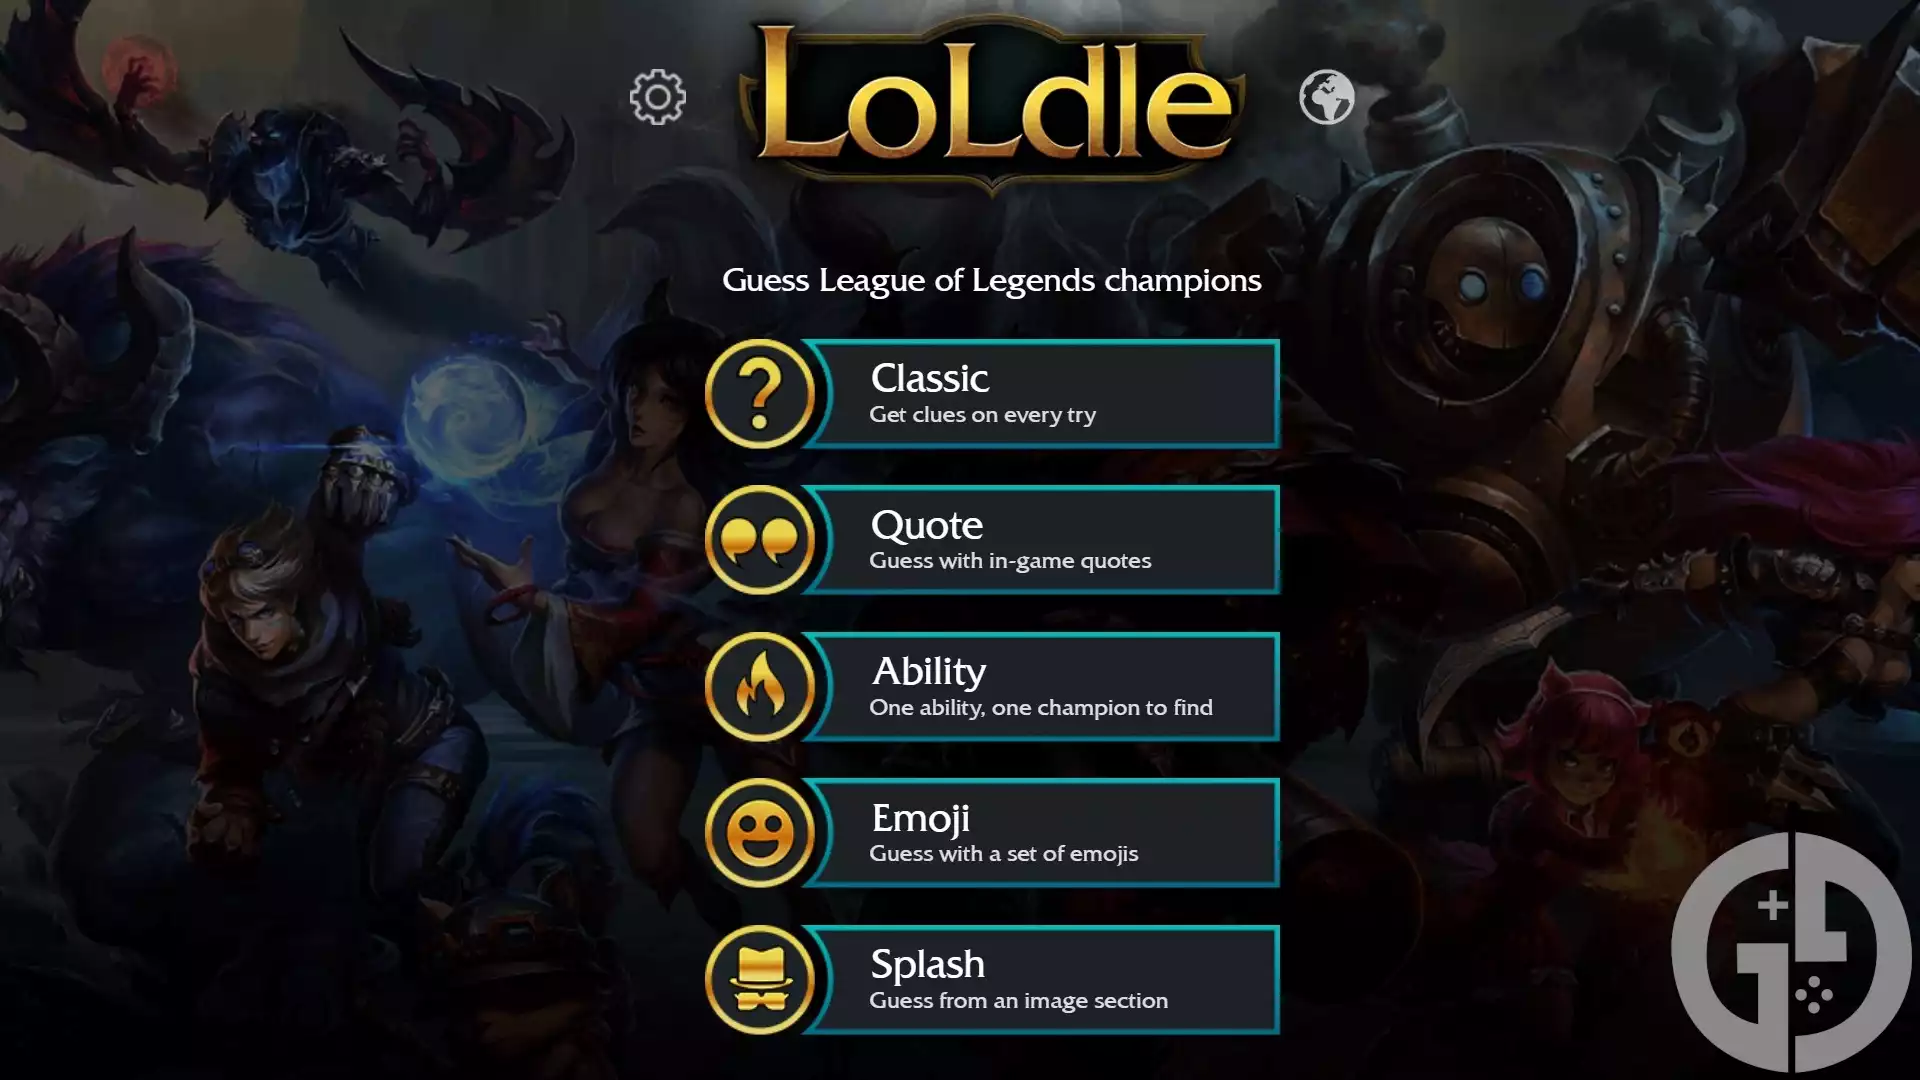 'LoLdle' answers for today, including Classic, Quote & more (May 9th)